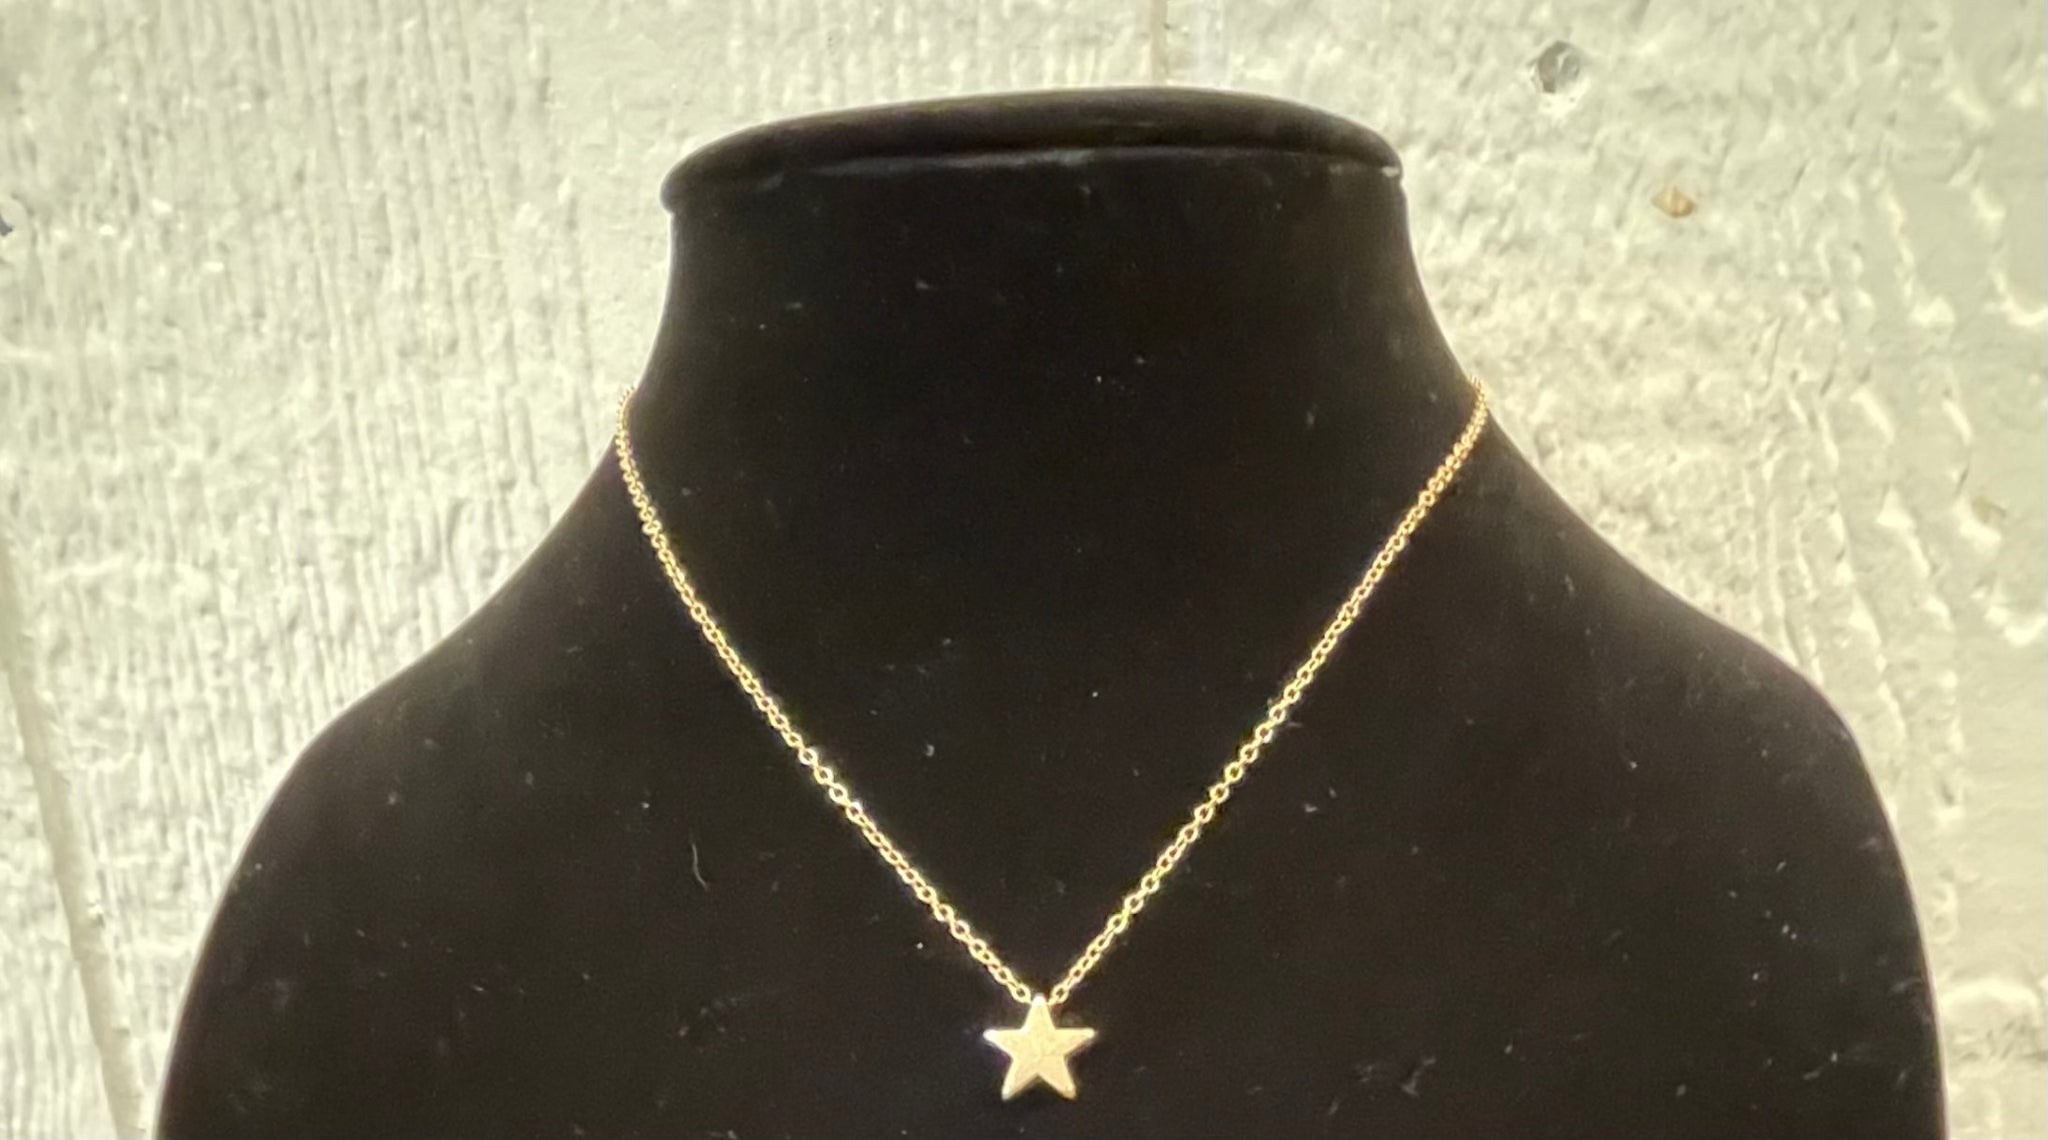 Simple Star Necklace